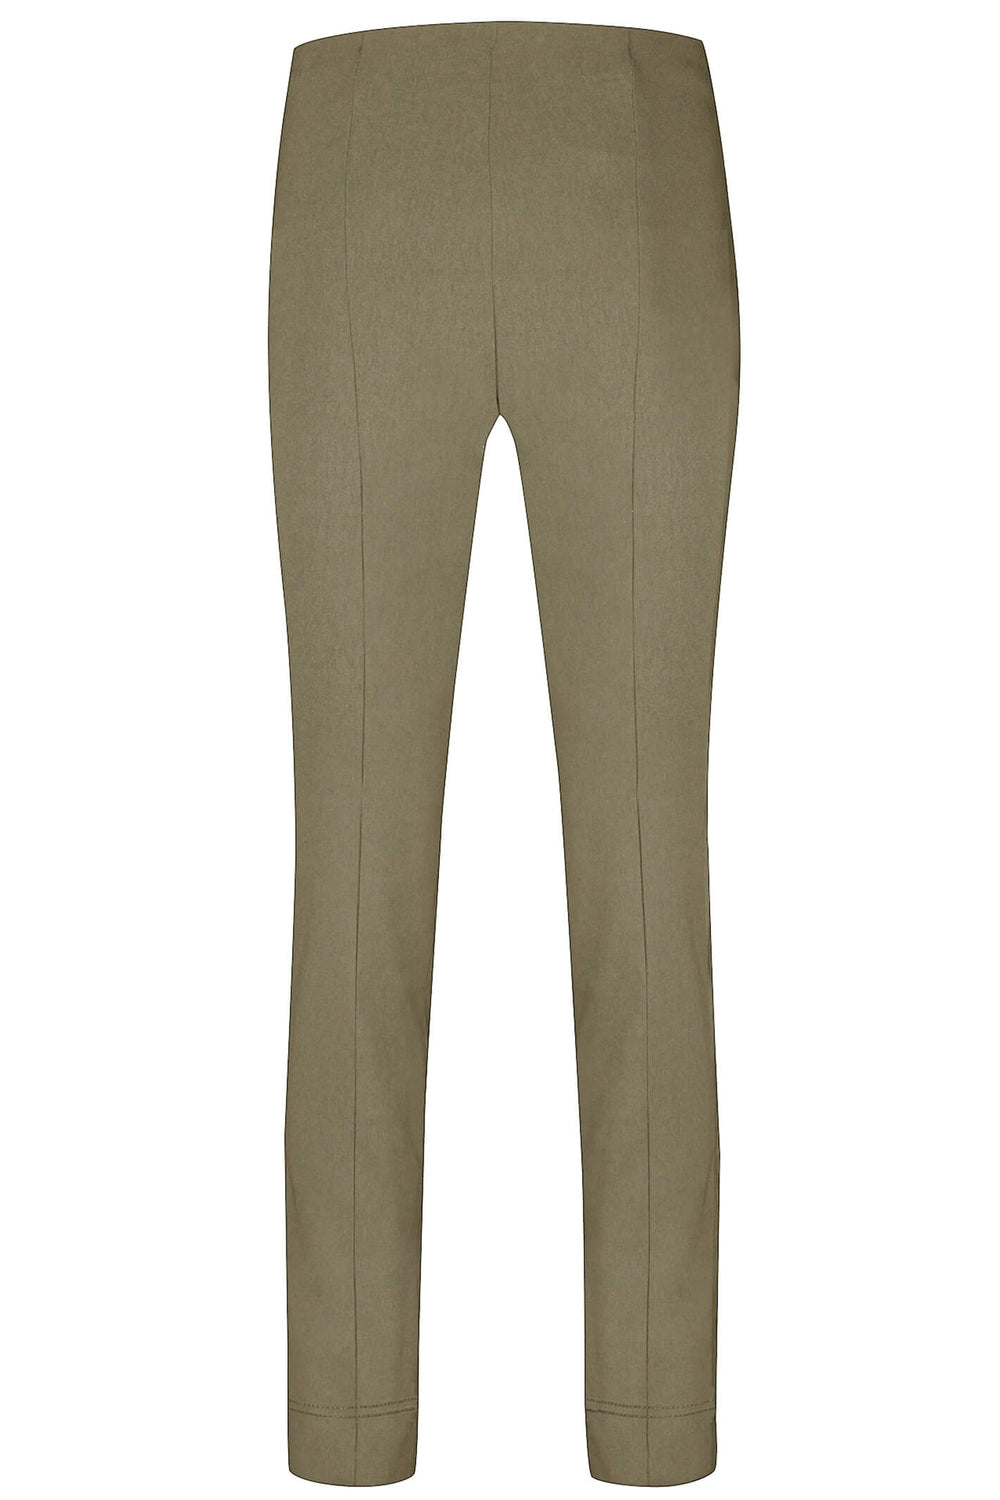 Robell 51673-5499-17 Rose Taupe Full Length Slim Fit Trousers - Dotique